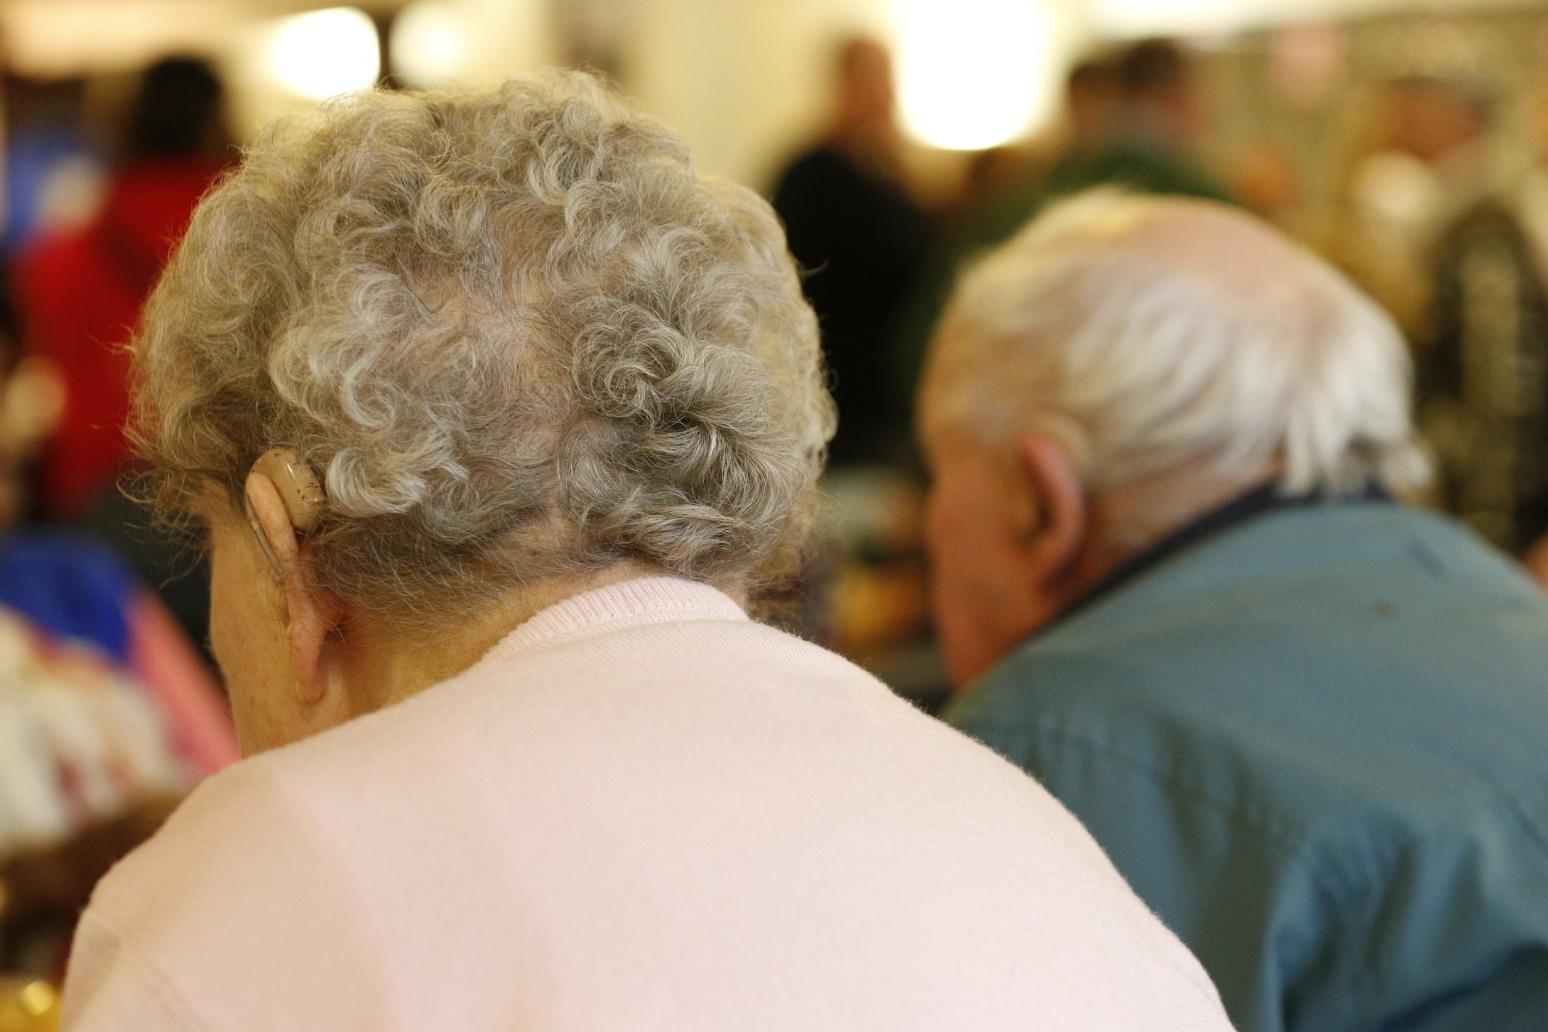 Adult social care services braced for most challenging year ever  Adass